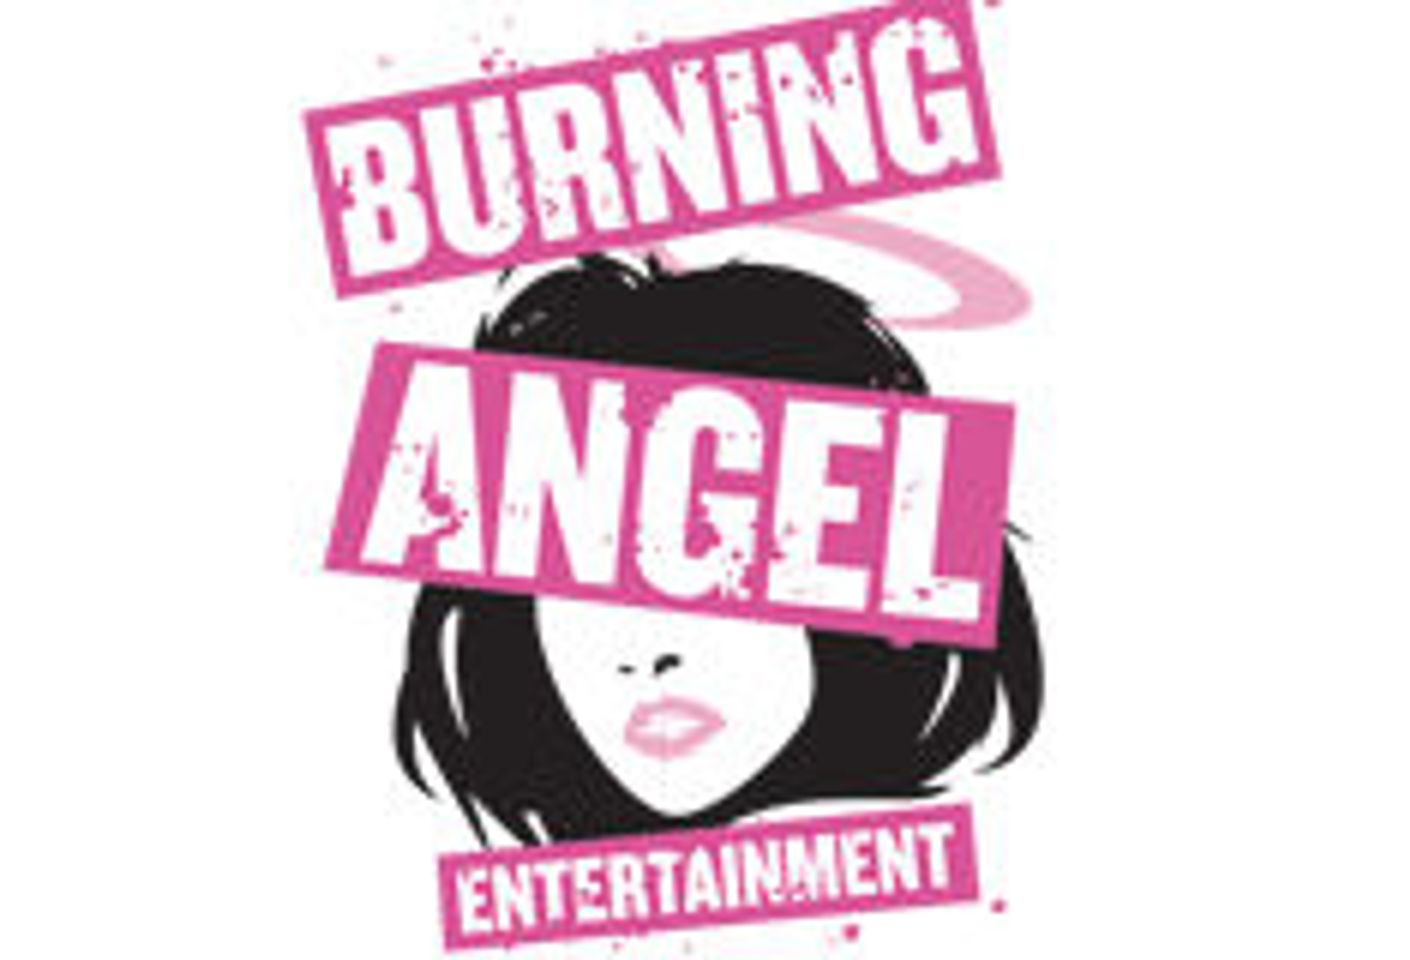 Miss Genocide on This Thursday's BurningAngel Webcam Show